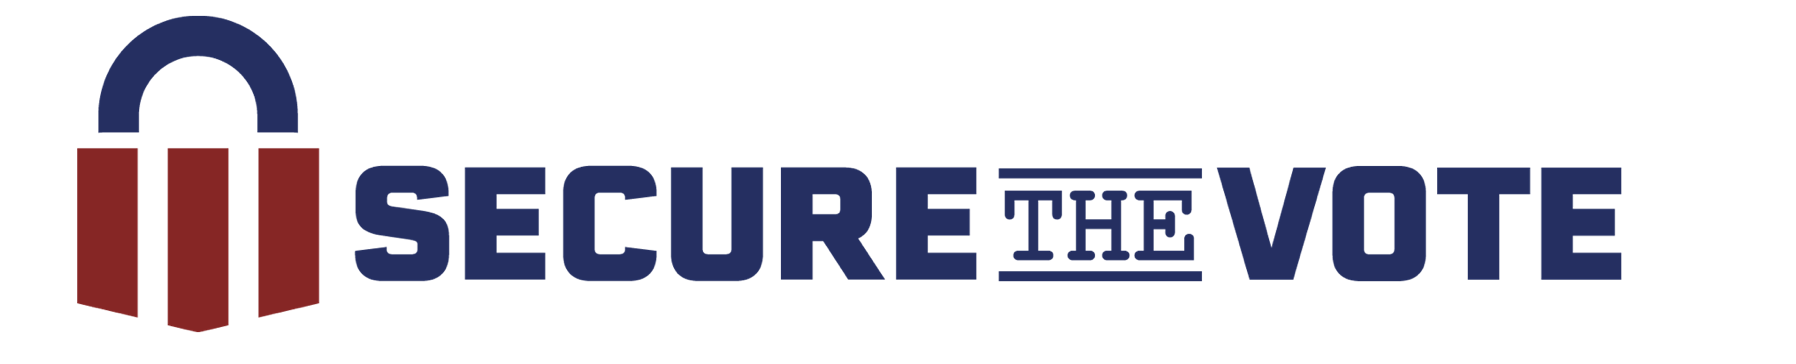 secure the vote logo